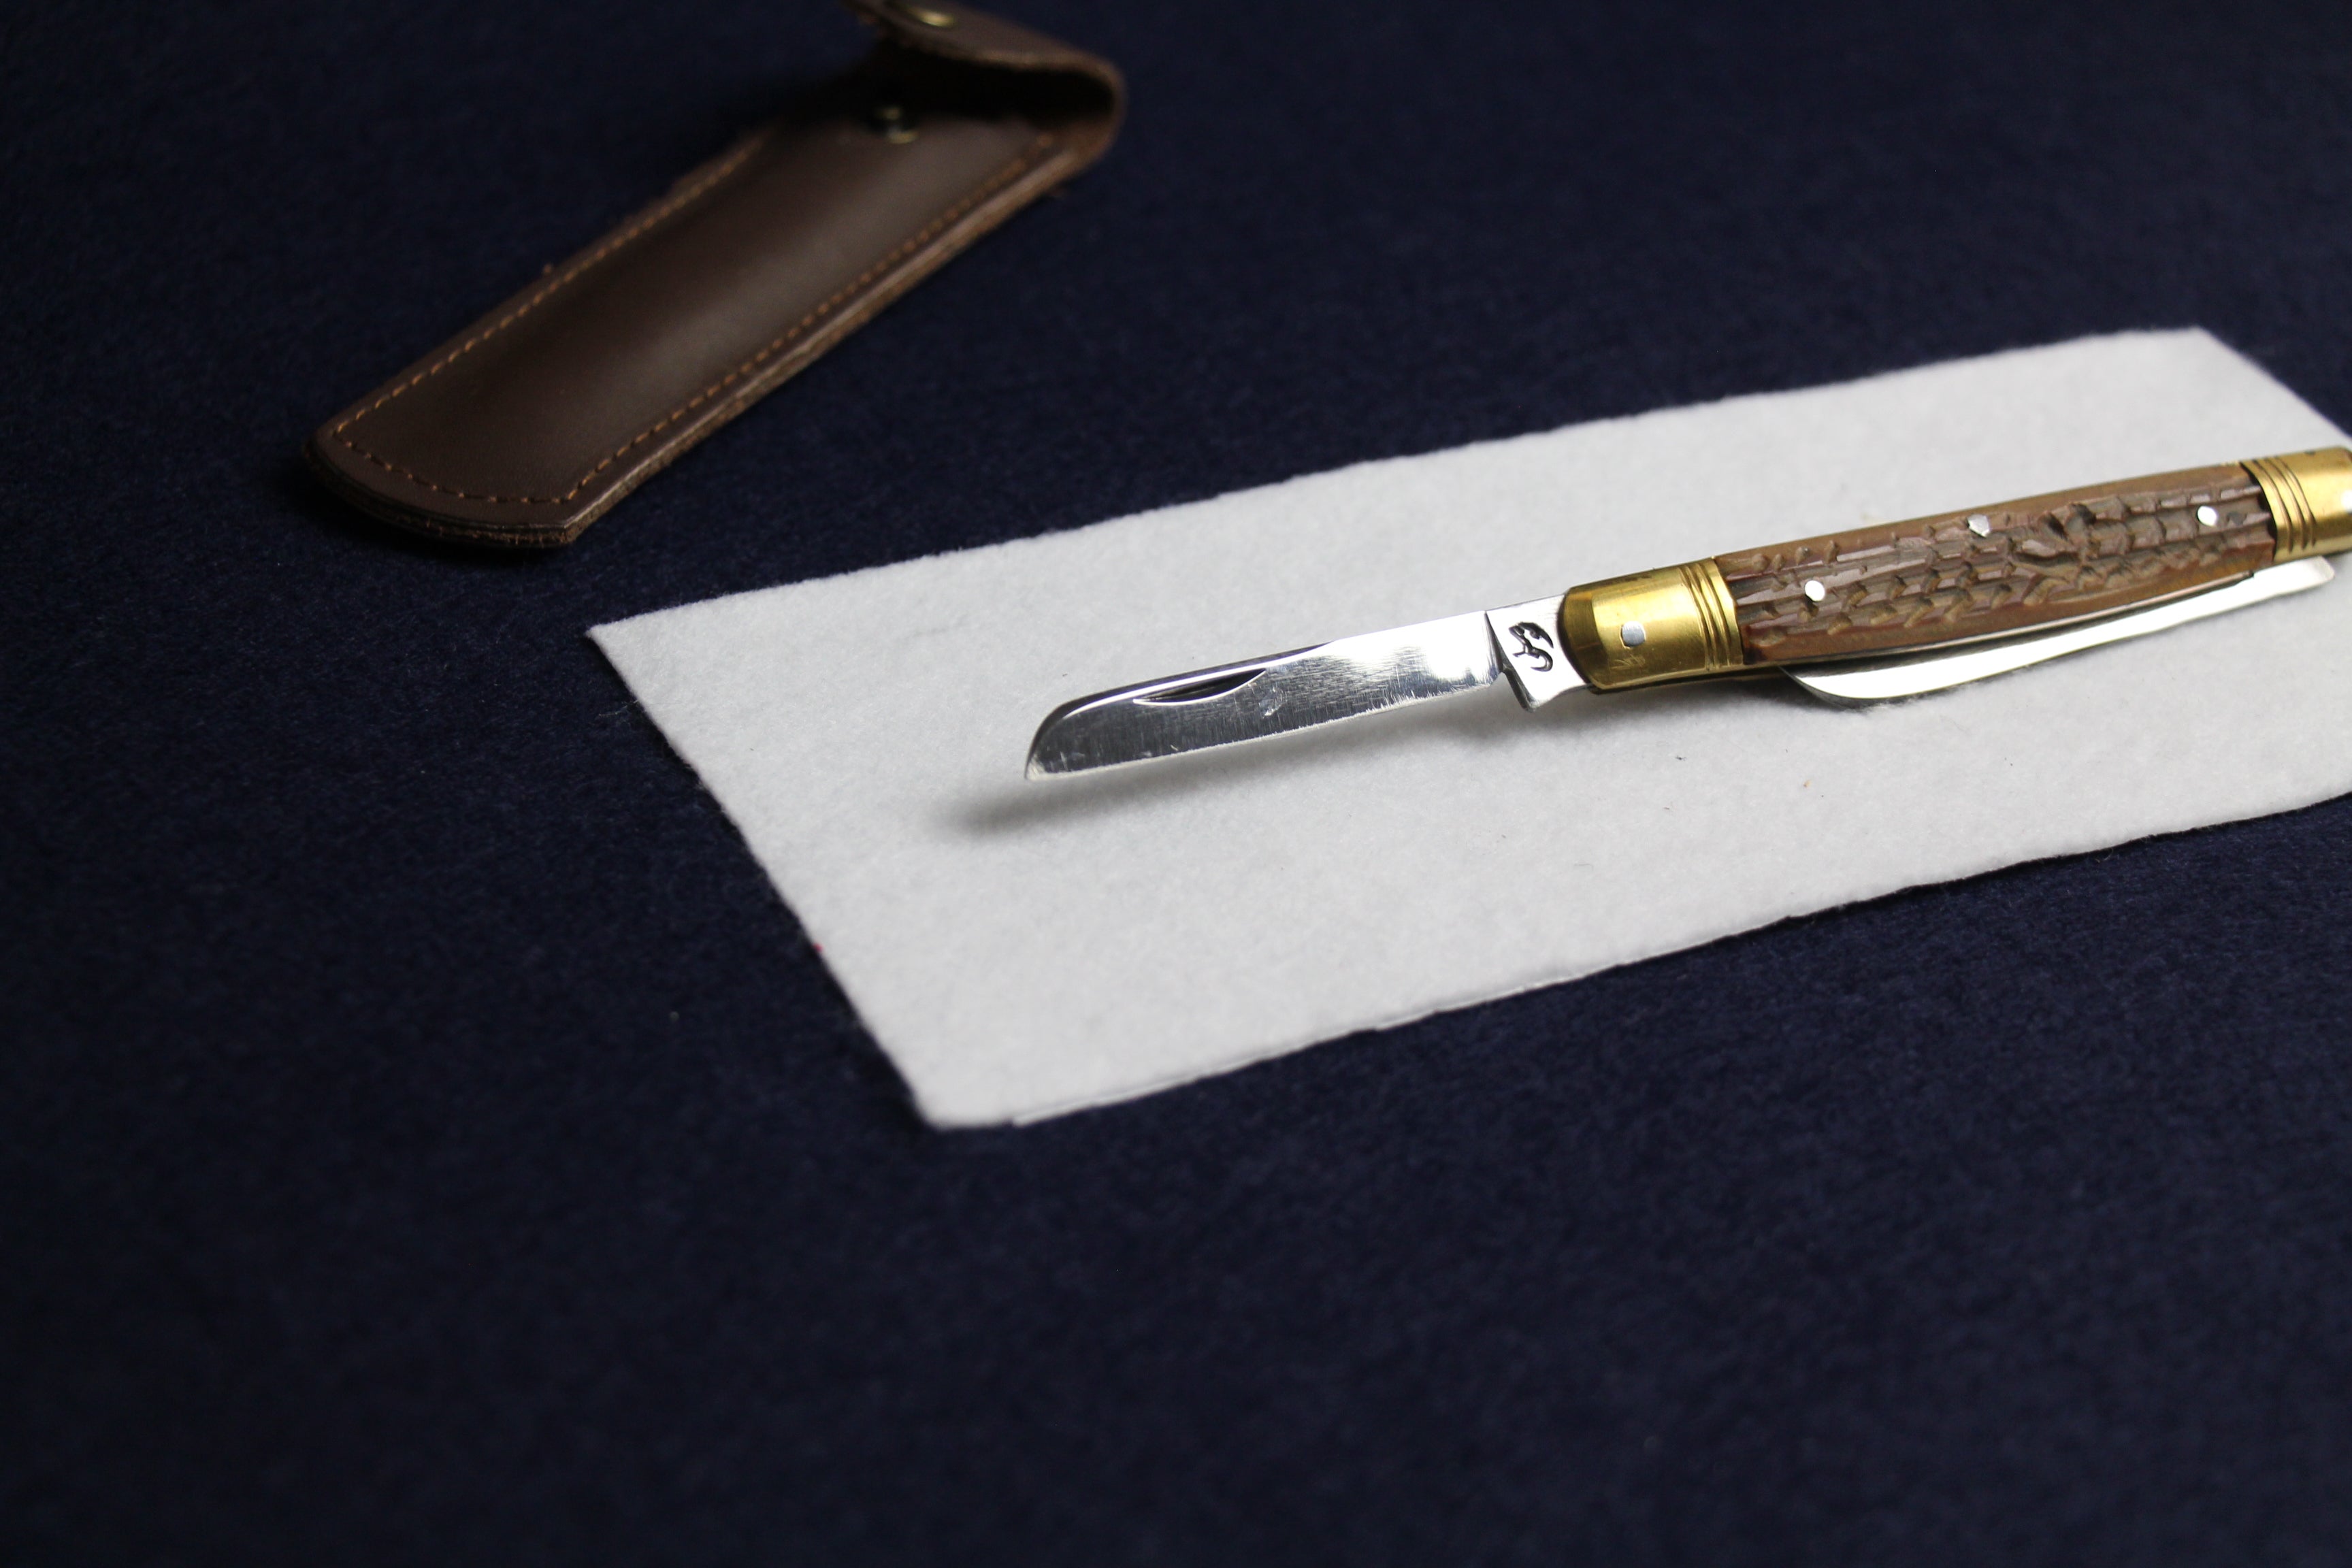 Ghalamtarash - Pocket knife for Arabic calligraphy qalam pens with two blades and leather case